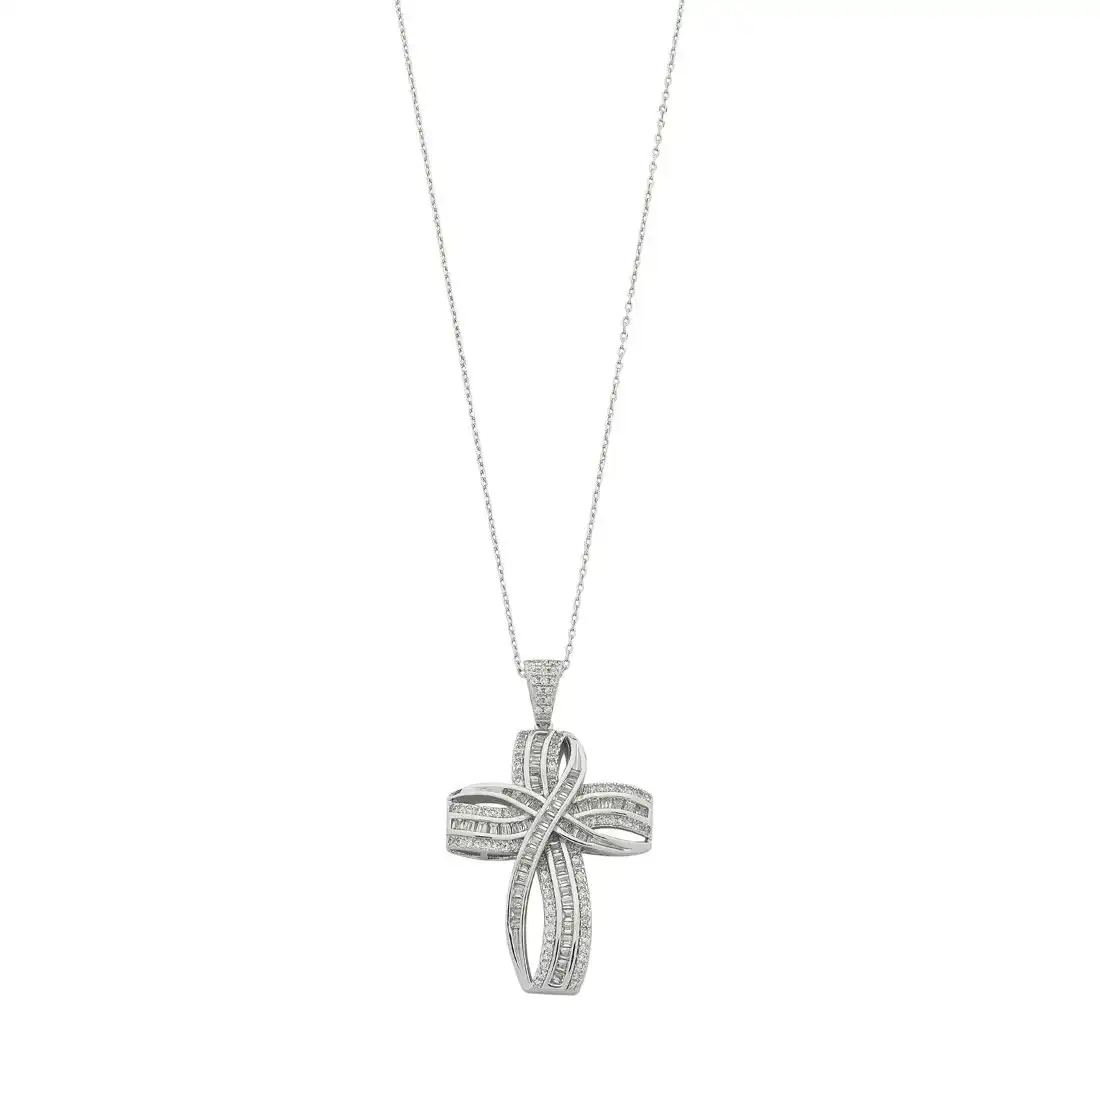 45cm Sterling Silver Cubic Zirconia Large Cross Necklace